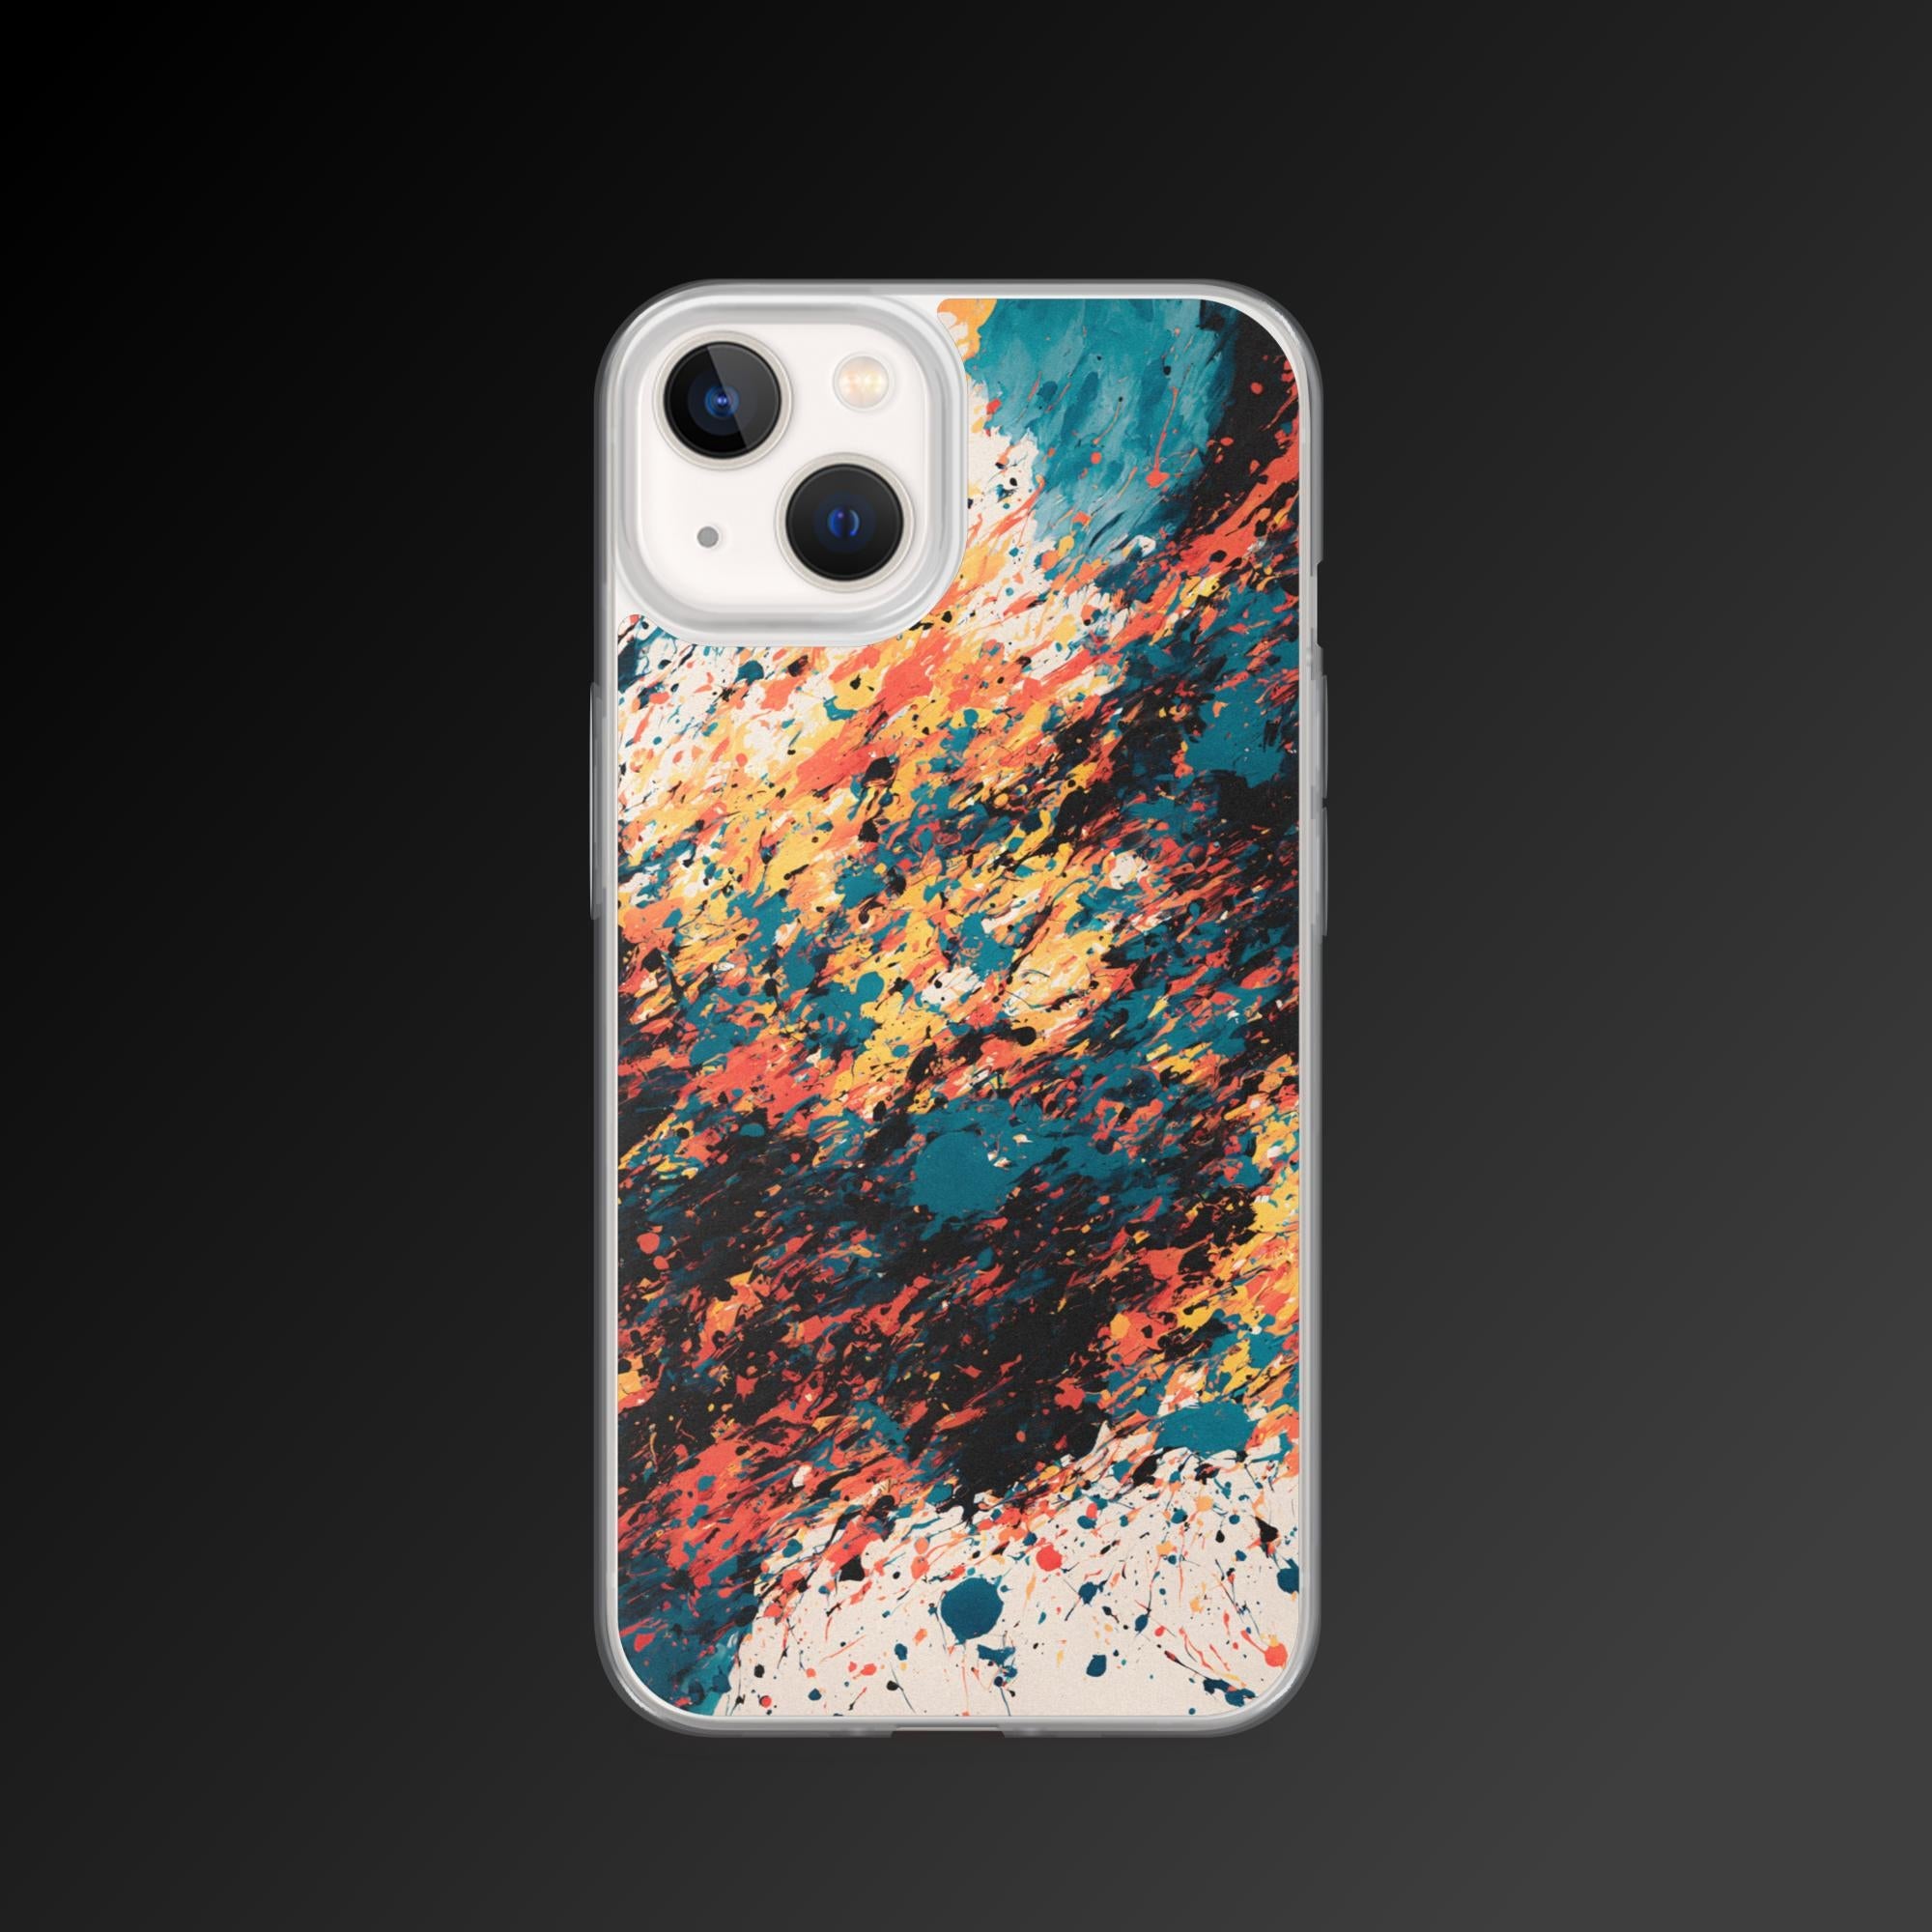 "Cross splash" clear iphone case - Clear iphone case - Ever colorful